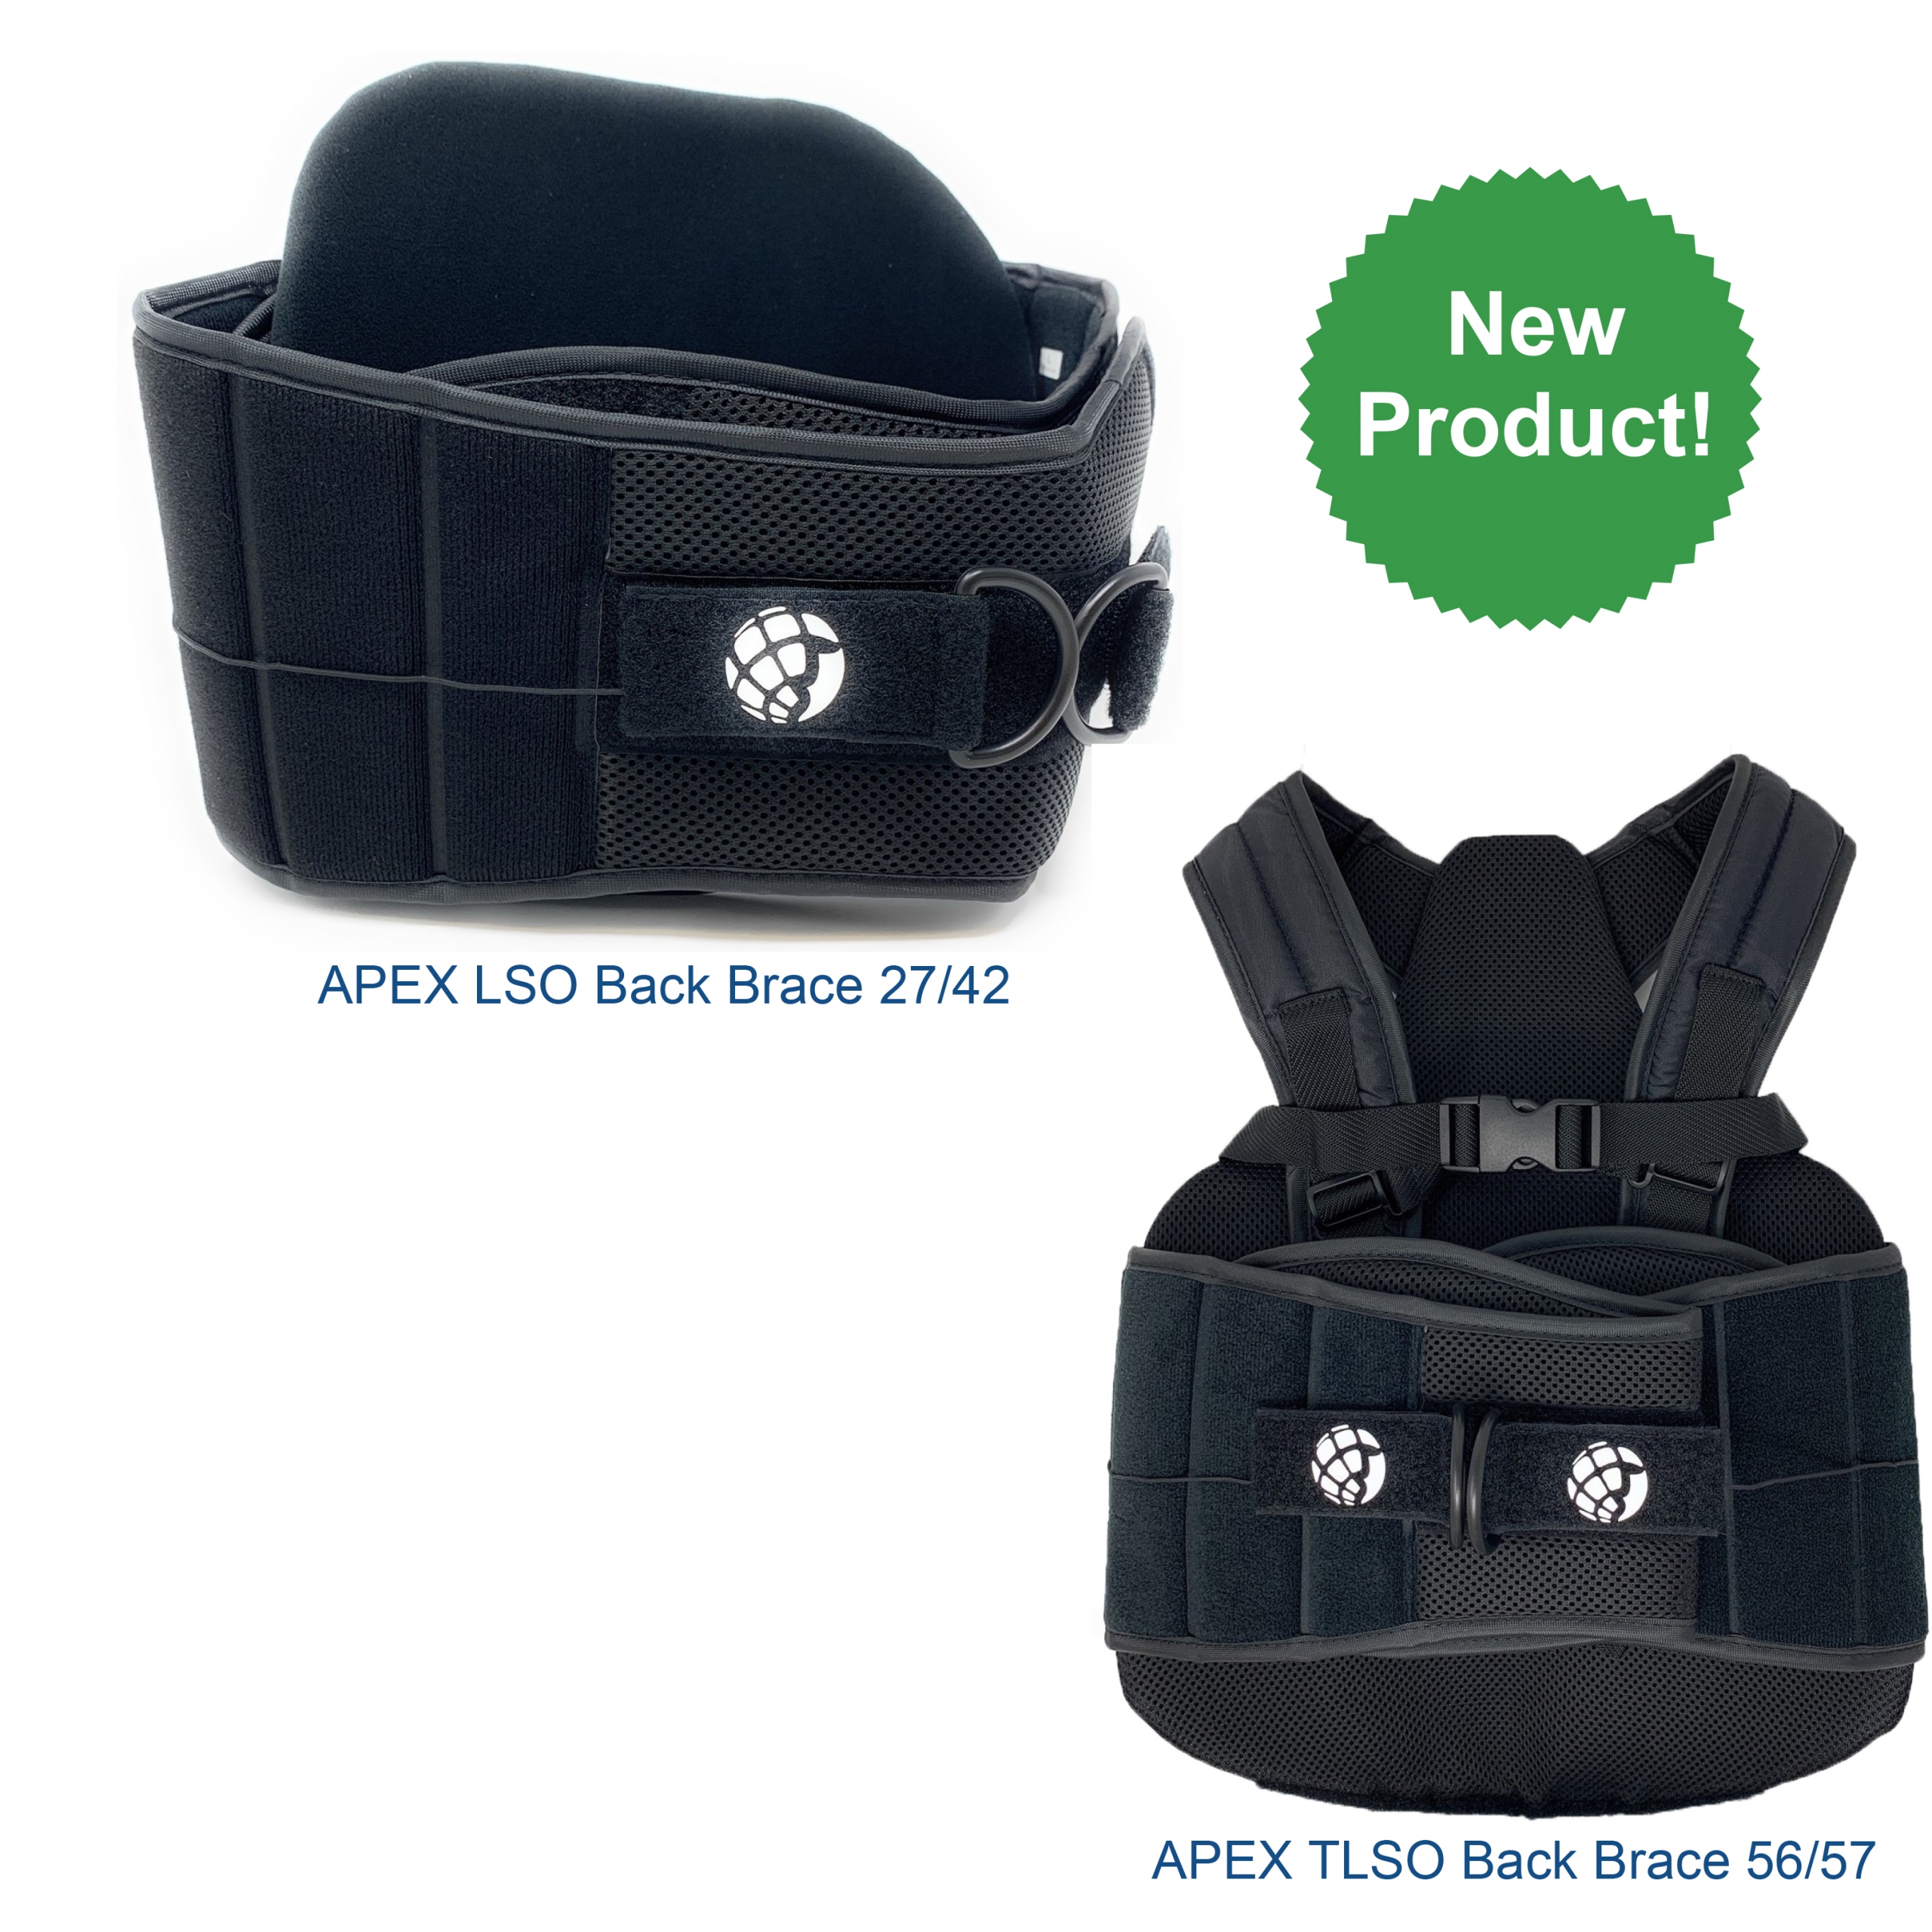 APEX LSO² & APEX TLSO Back Brace SUGGESTED HCPC: L0627 and L0642, L0631 and L0648, L0637 and L0650, L0456 and L0457